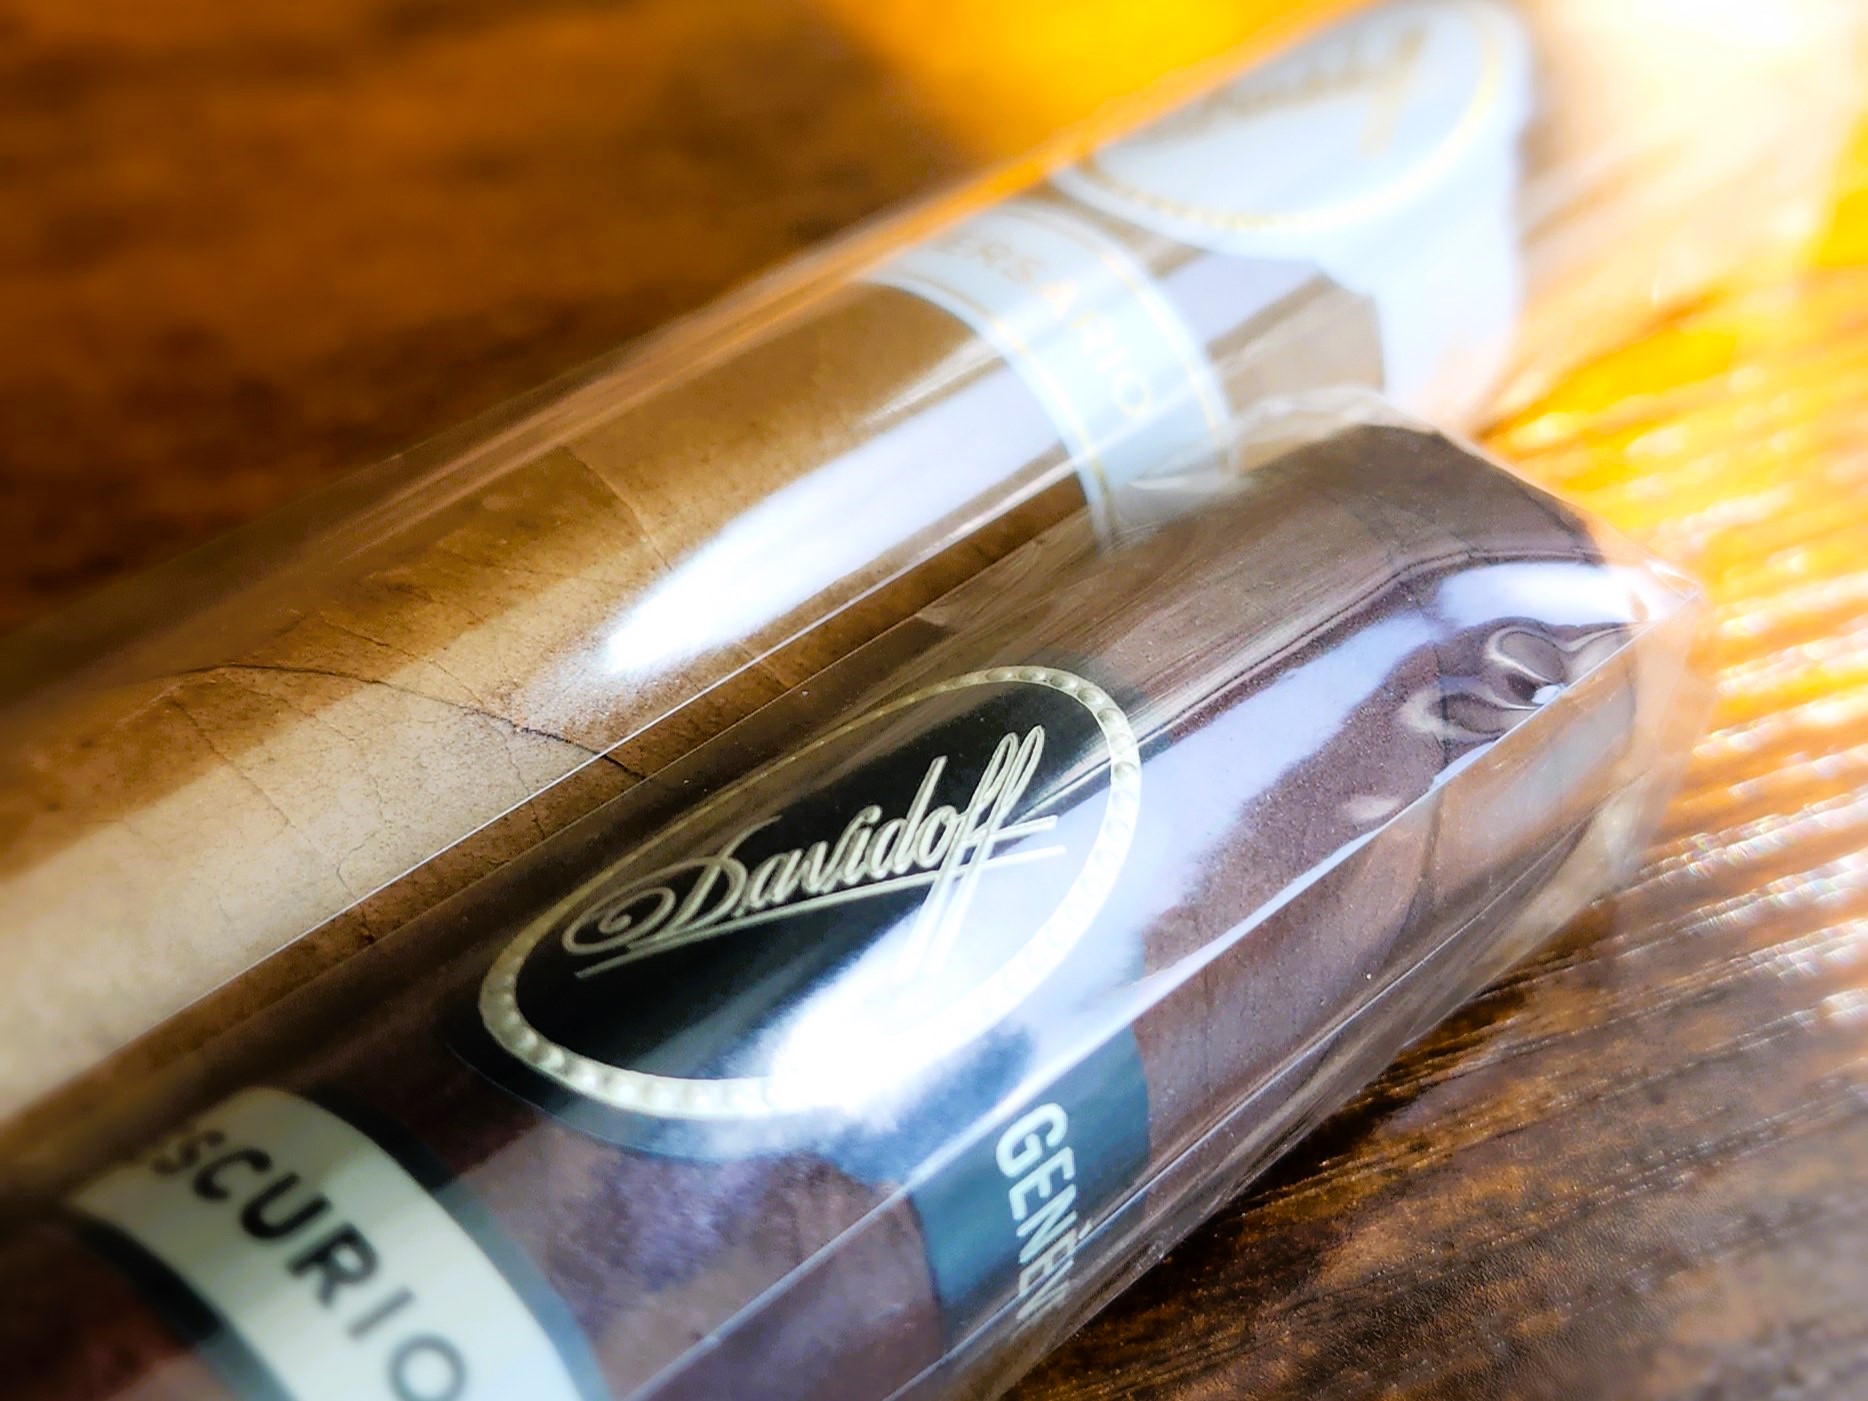 Davidoff Escurio and Aniversario cigars up close by Briley Kenney from The Manual